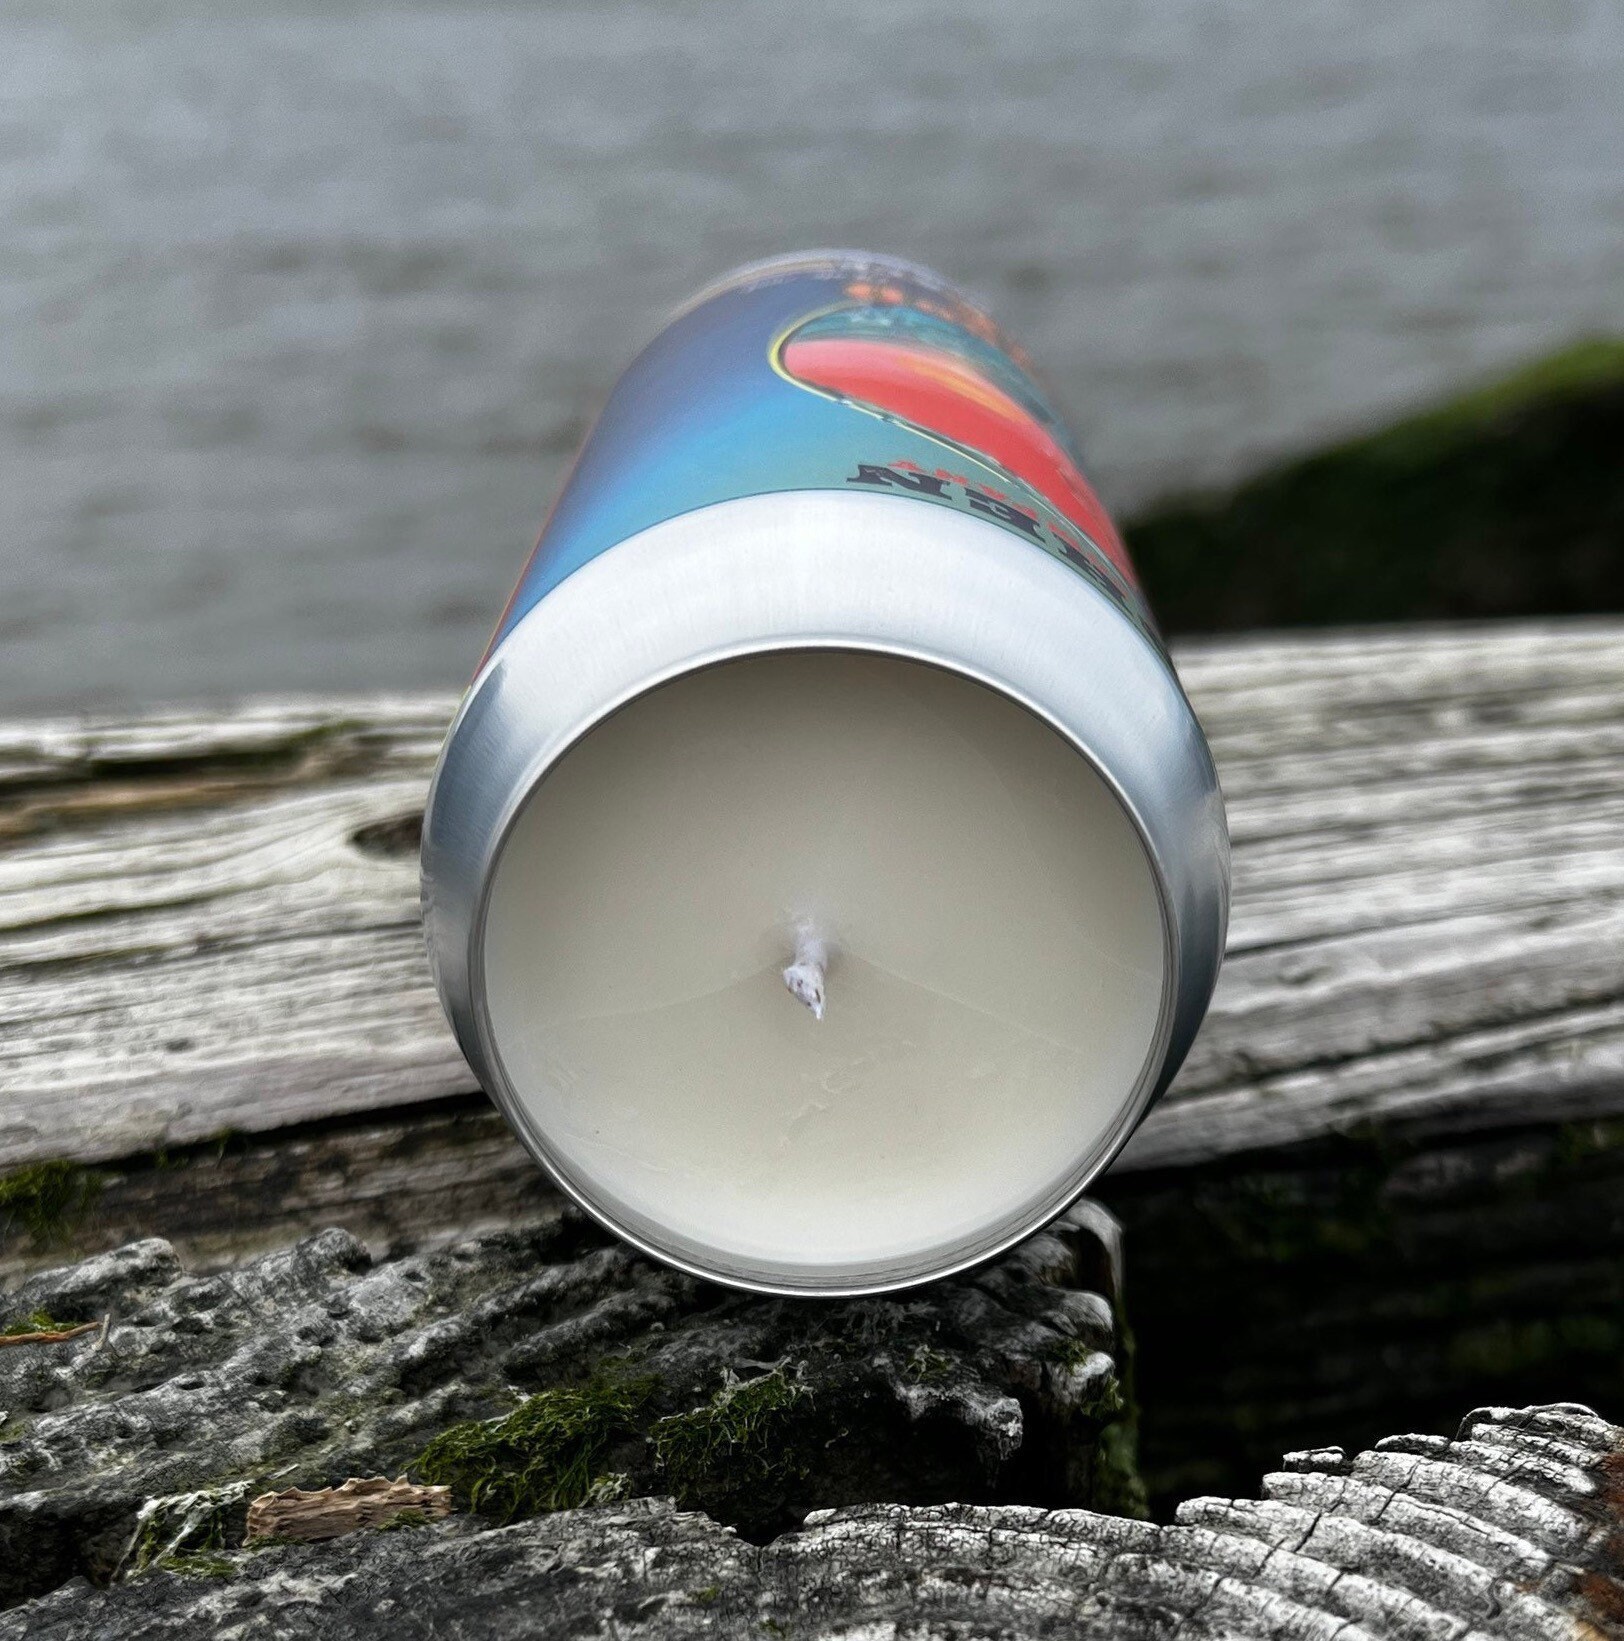 Holly Beach Soy Candle / MudHen Brewing Co.